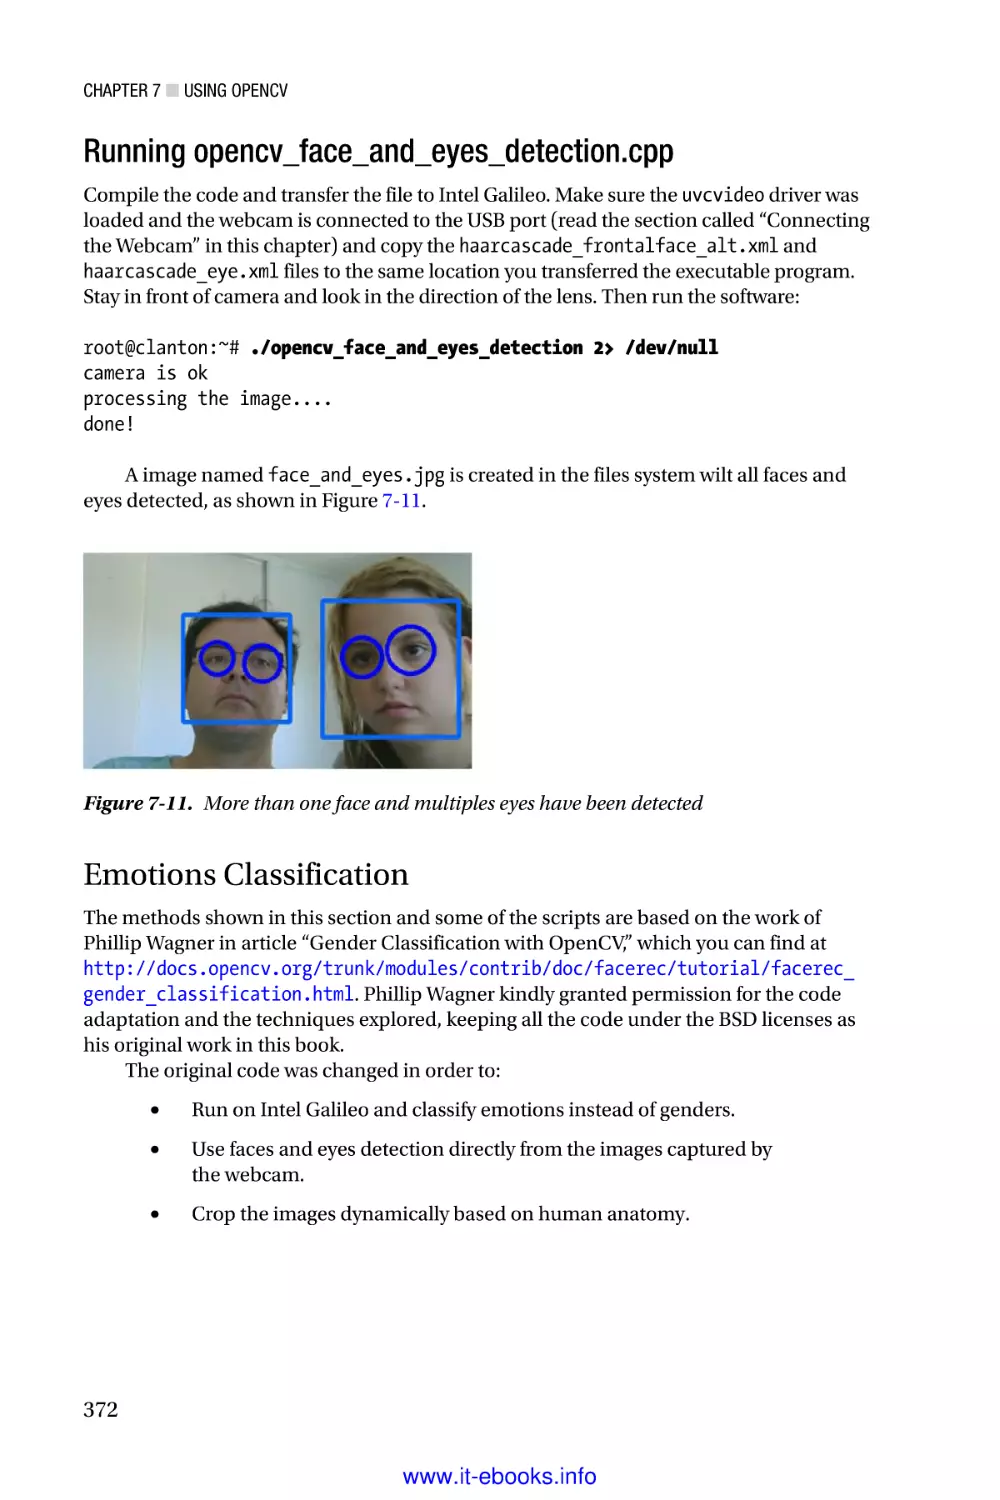 Running opencv_face_and_eyes_detection.cpp
Emotions Classification